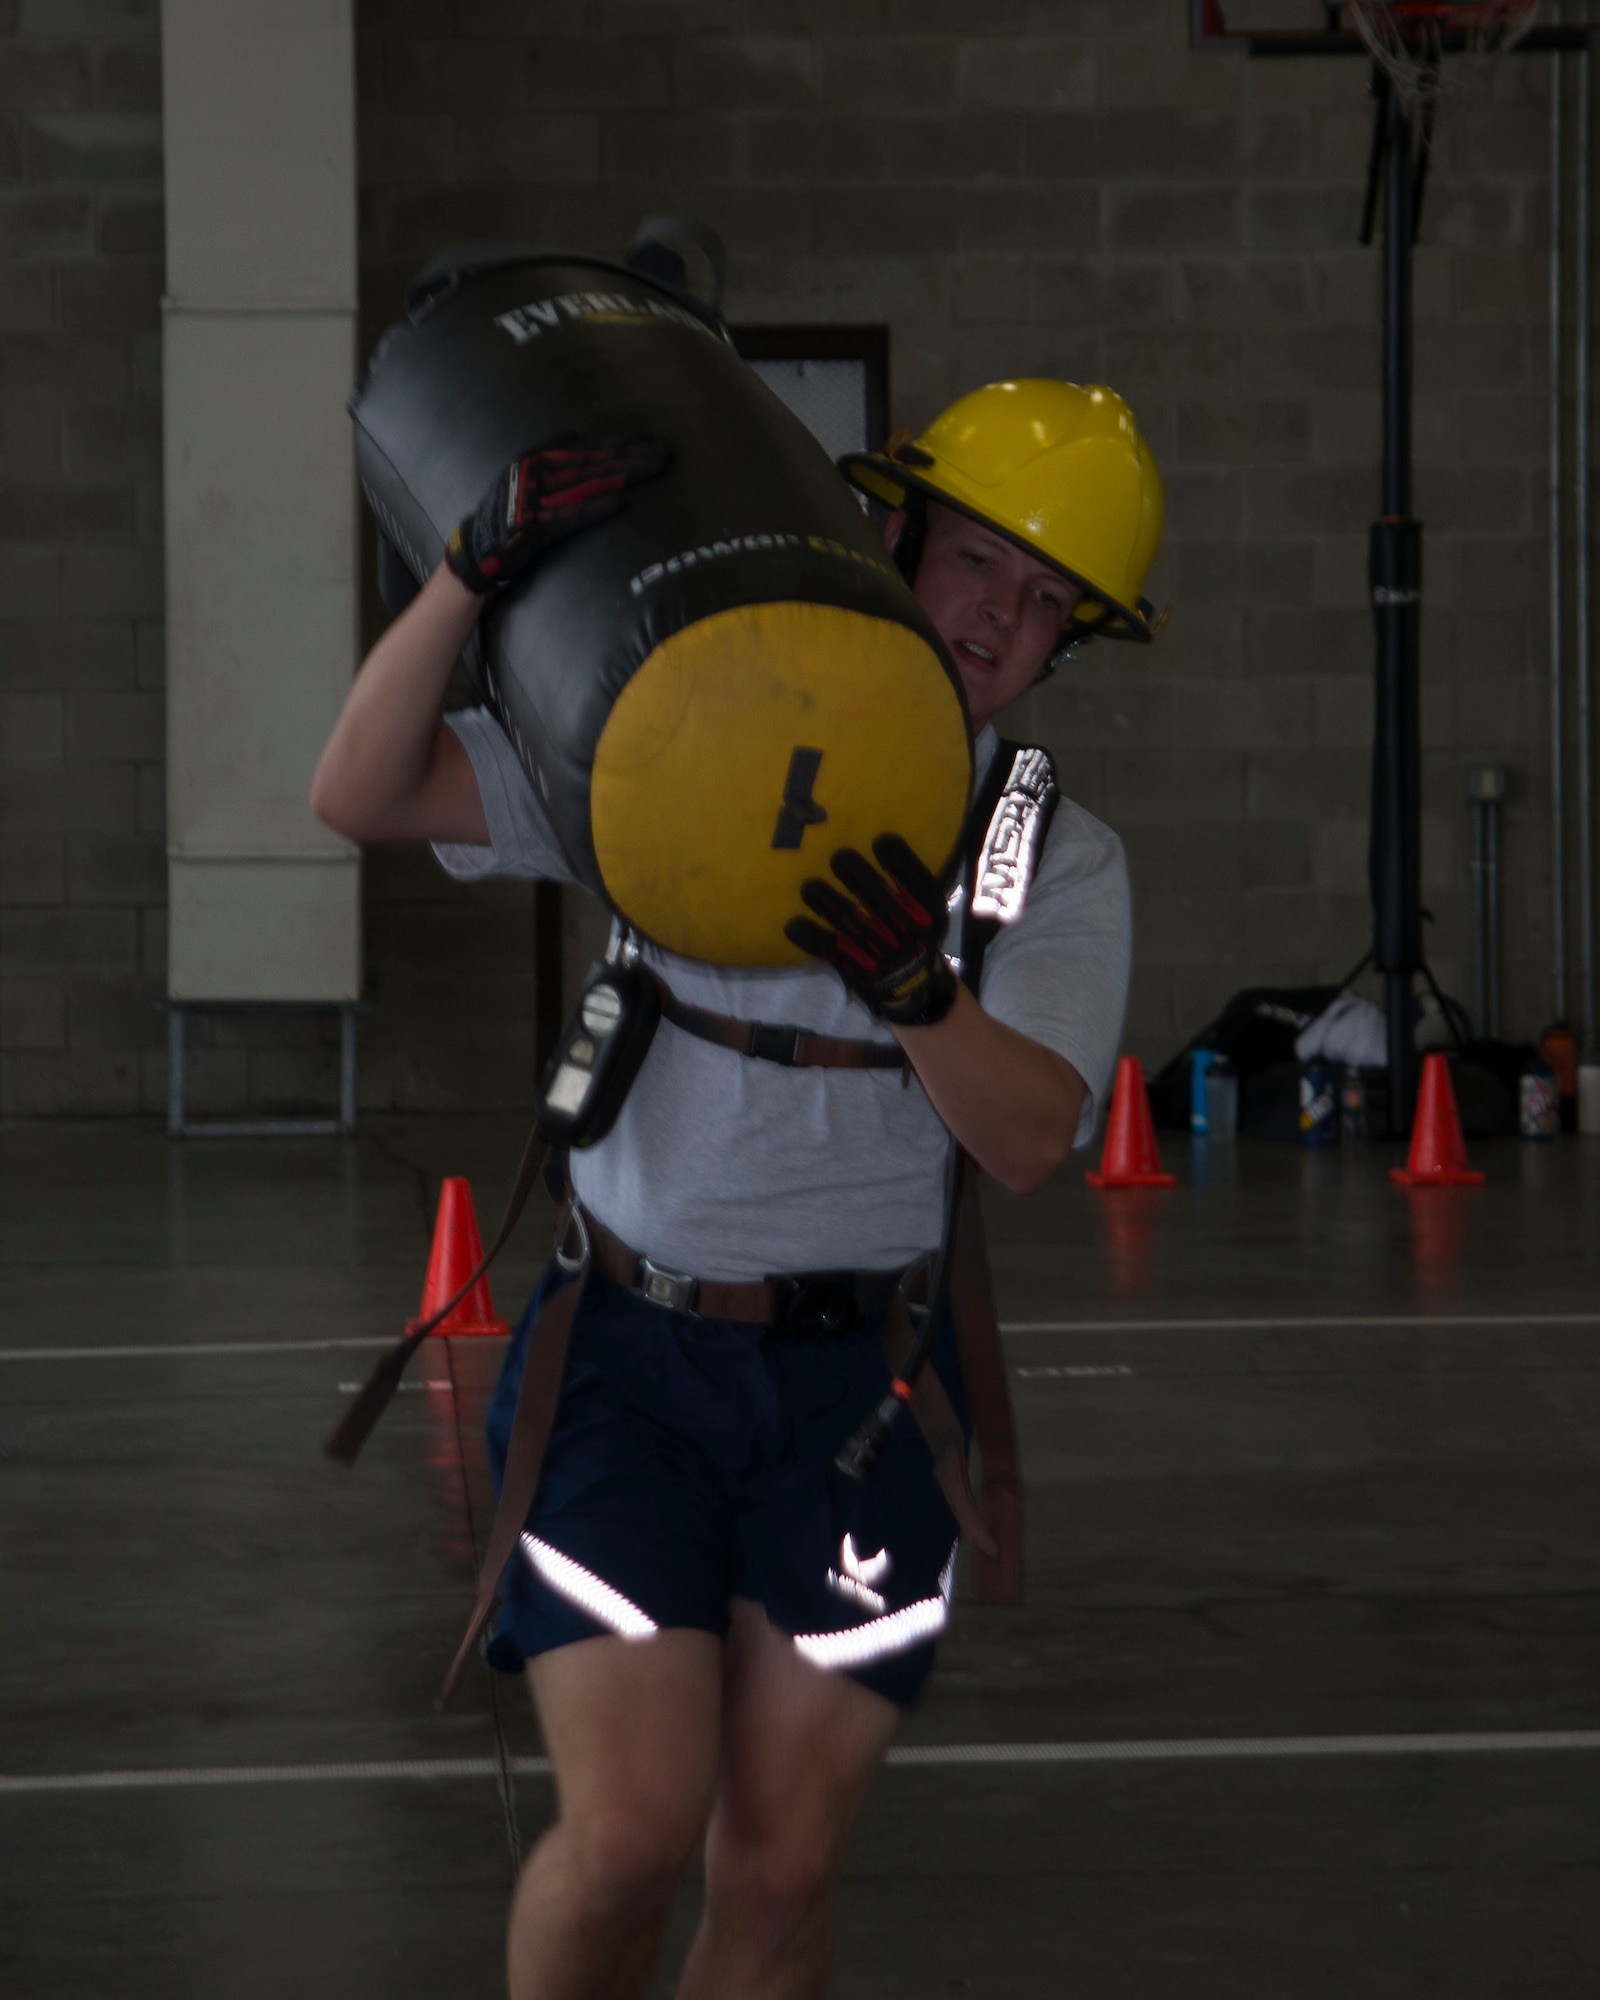 Reserve Officer Training Corps Cadet Matthew McCulla from Air Force ROTC Detachment 595 from North Carolina State University, Raleigh, North Carolina, carries a weighted training bag through an obstacle course at the Crash Fire Station on MacDill Air Force Base, Fla., July 6, 2018.